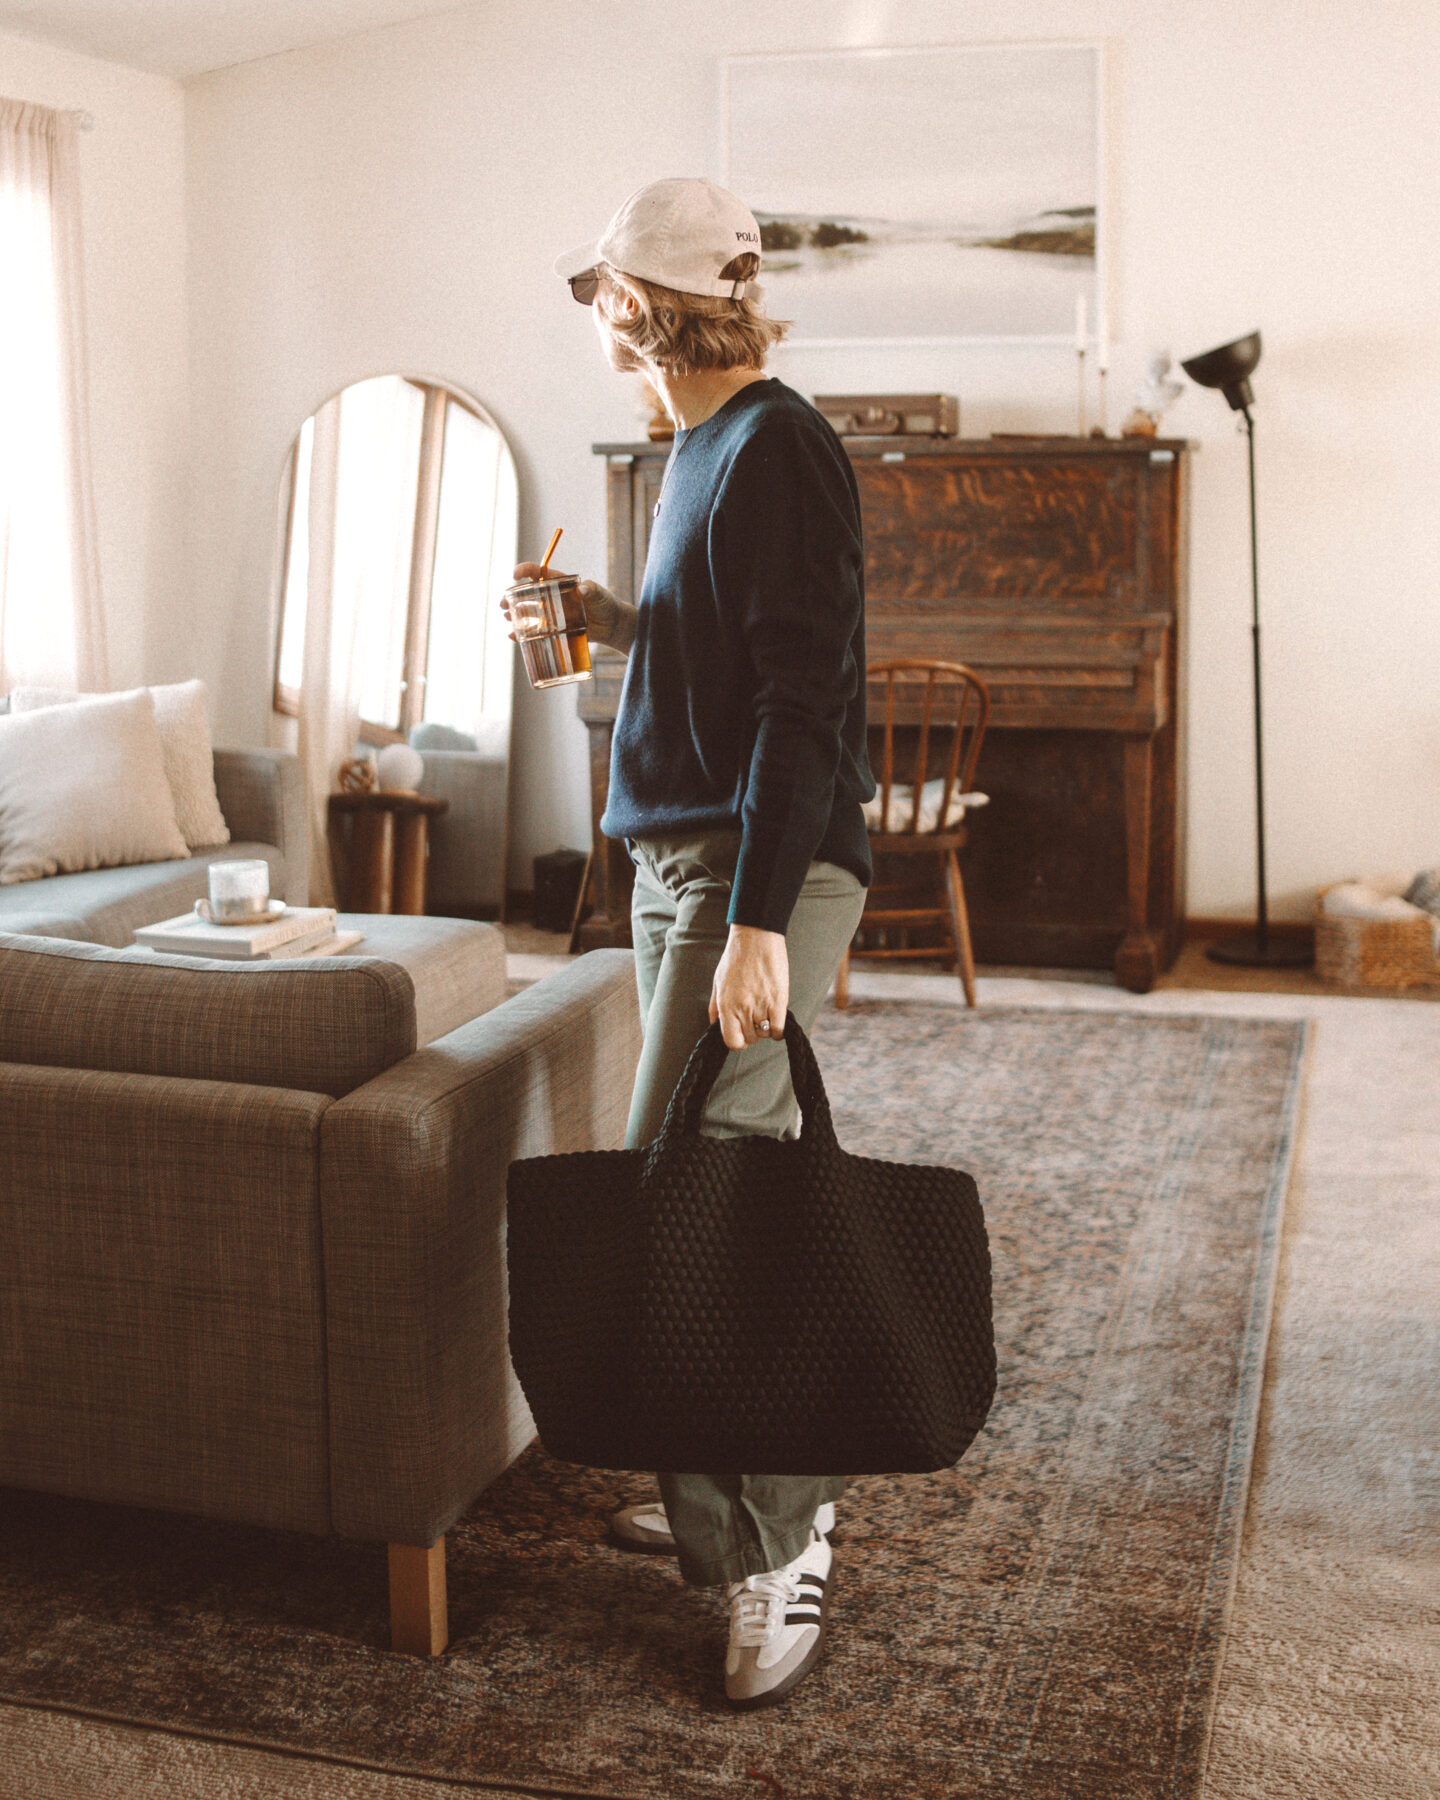 Karin Emily wears a navy blue cashmere sweater and green khaki sailor trousers from J. Crew with a pair of adidas samba sneakers and a naghedi st. Barths bag